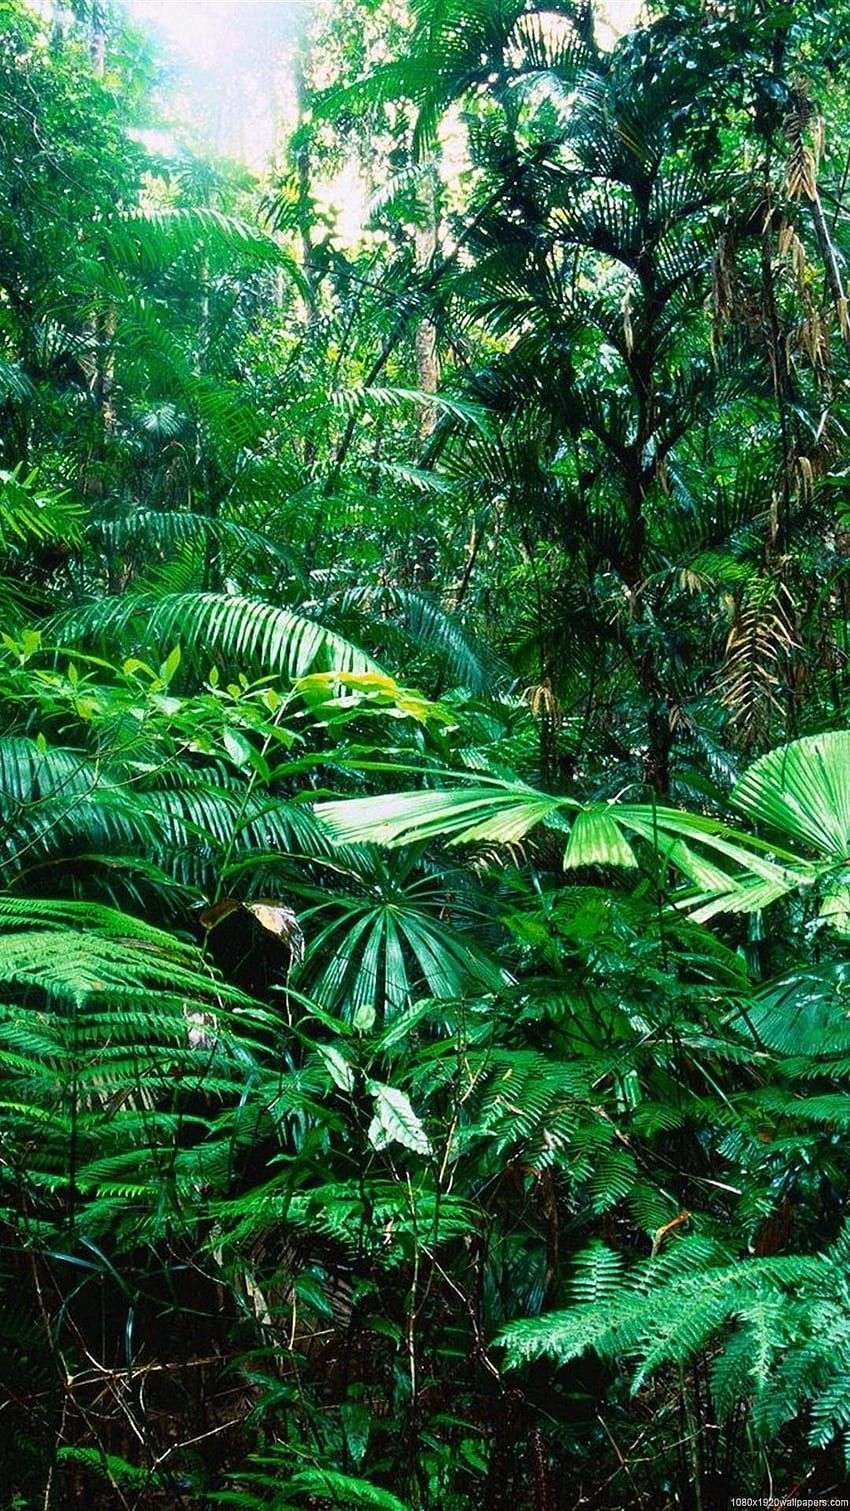 Dense forest with a mix of ferns and palms - Jungle